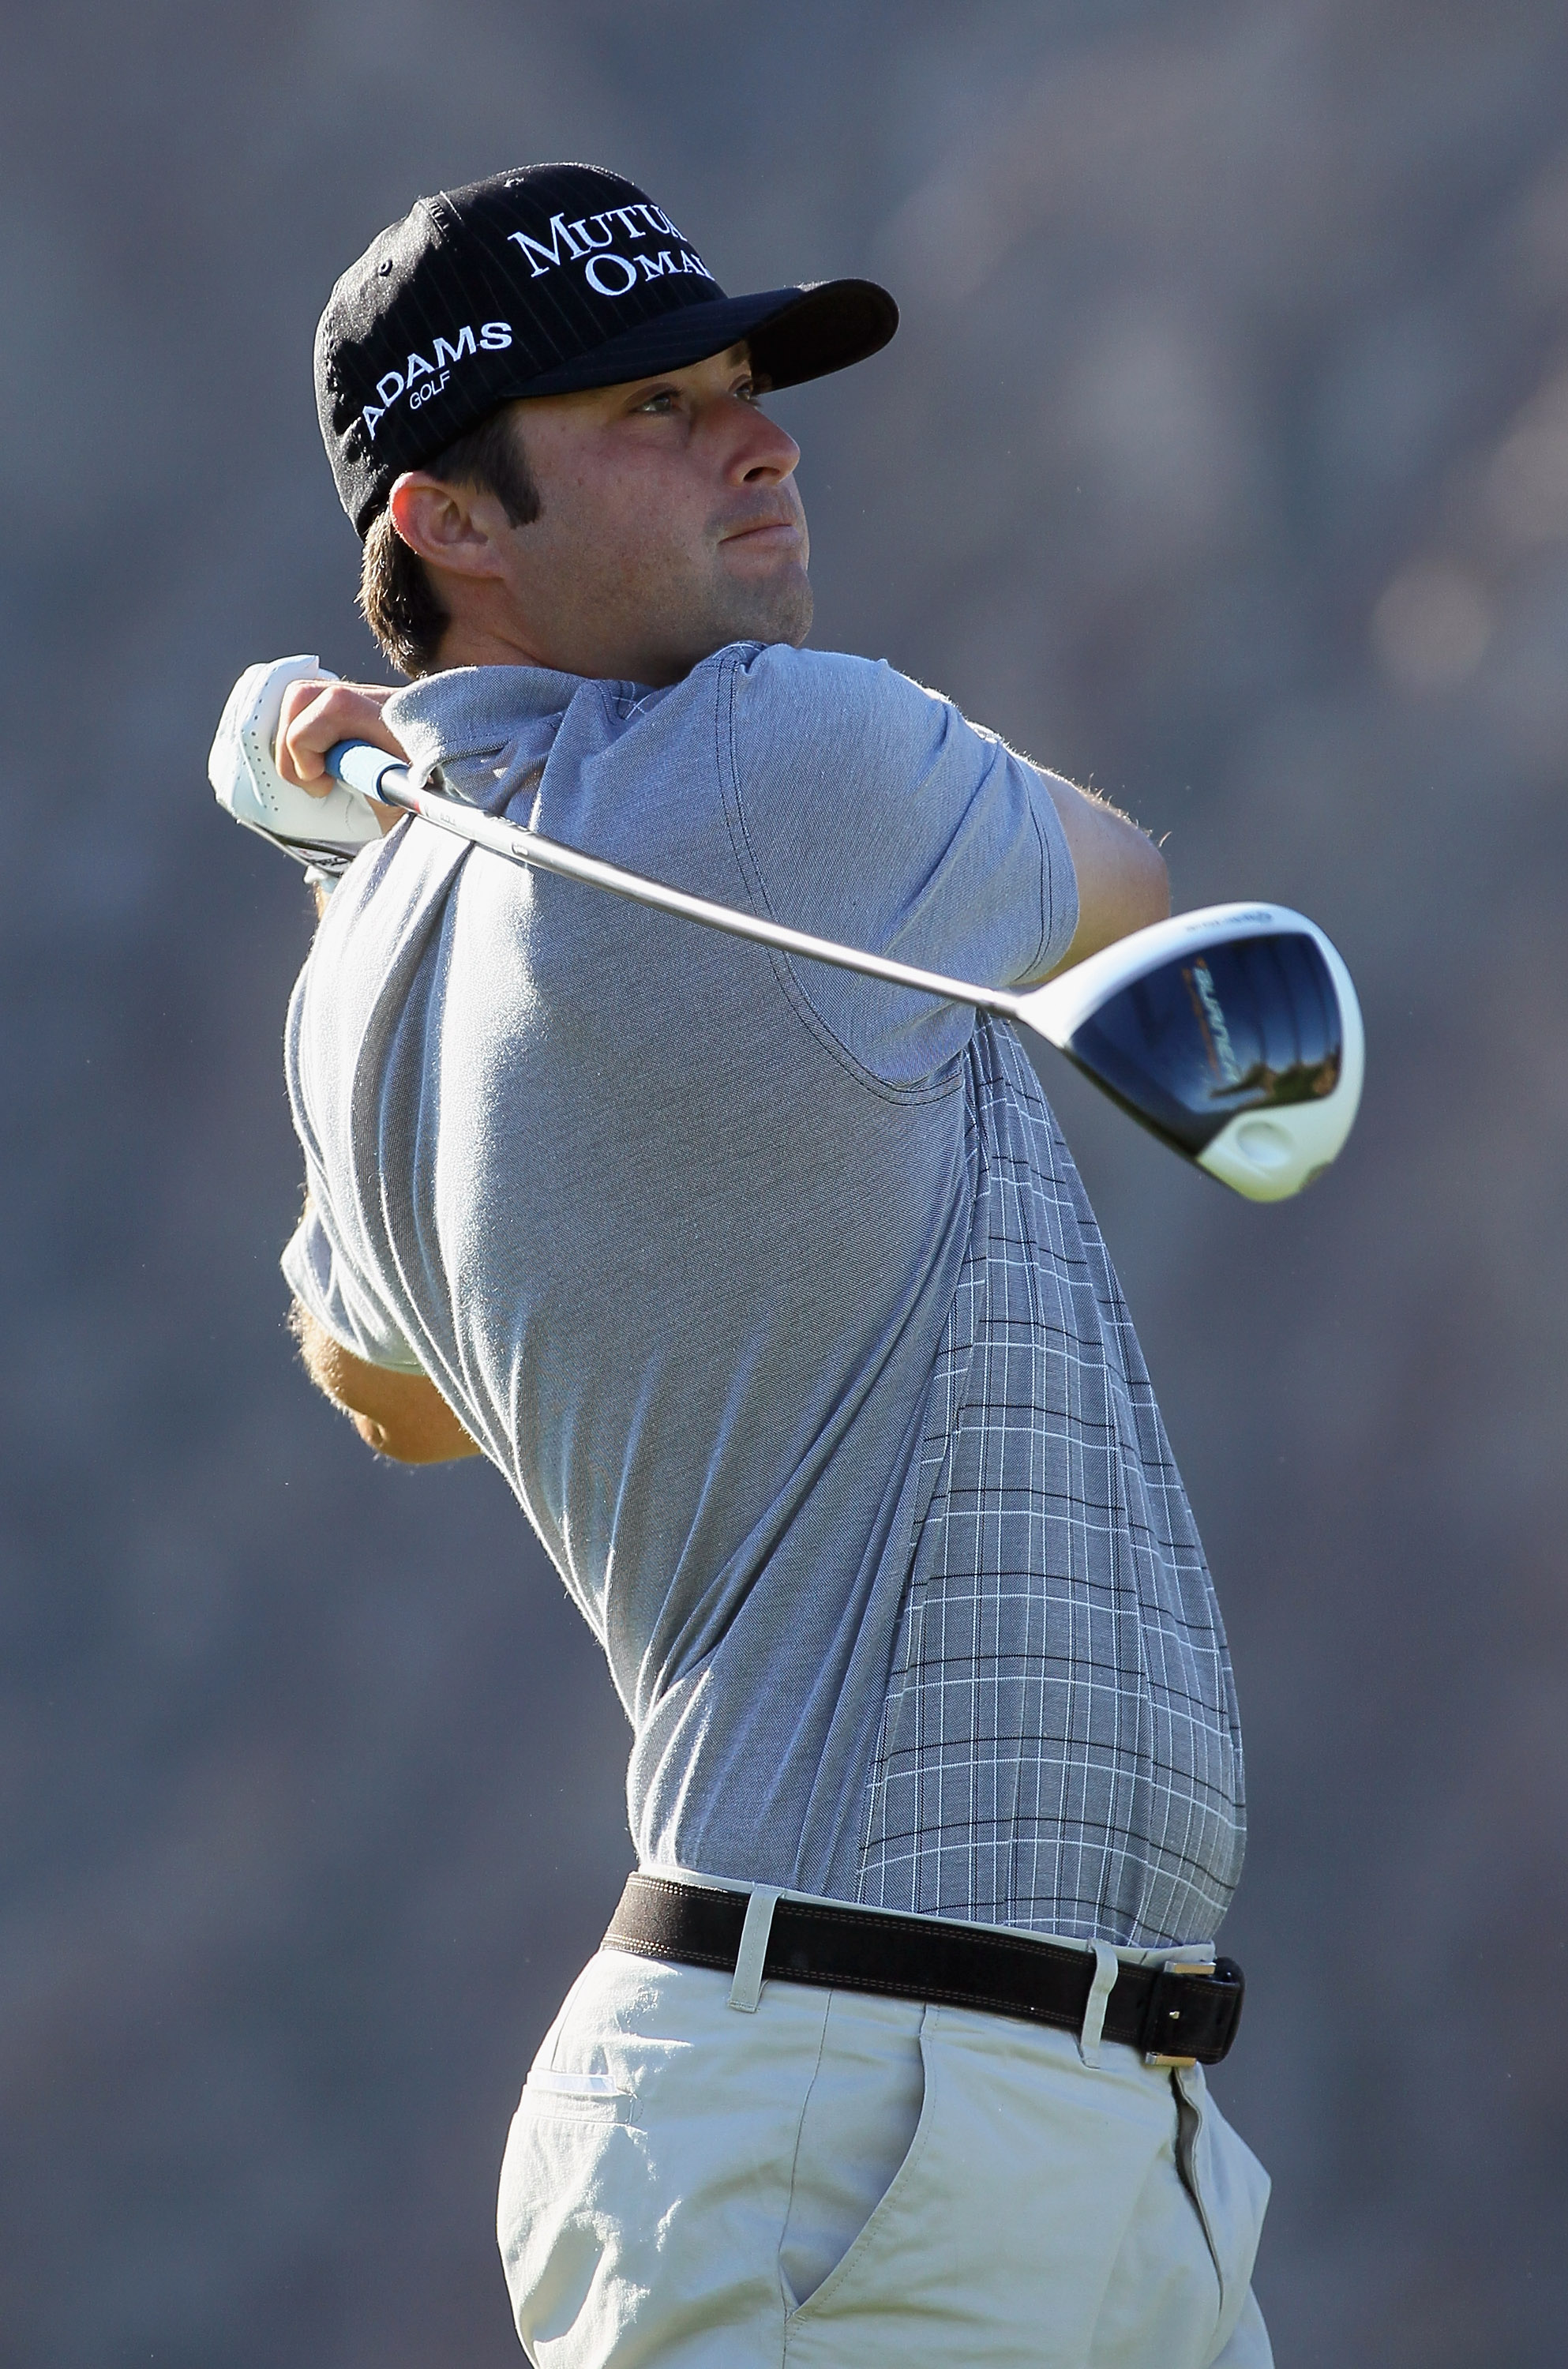 LA QUINTA, CA - JANUARY 21:  Nate Smith hits a tee shot on the second hole during the third round of the Bob Hope Classic at the Silver Rock Resort on January 21, 2011 in La Quinta, California.  (Photo by Jeff Gross/Getty Images)